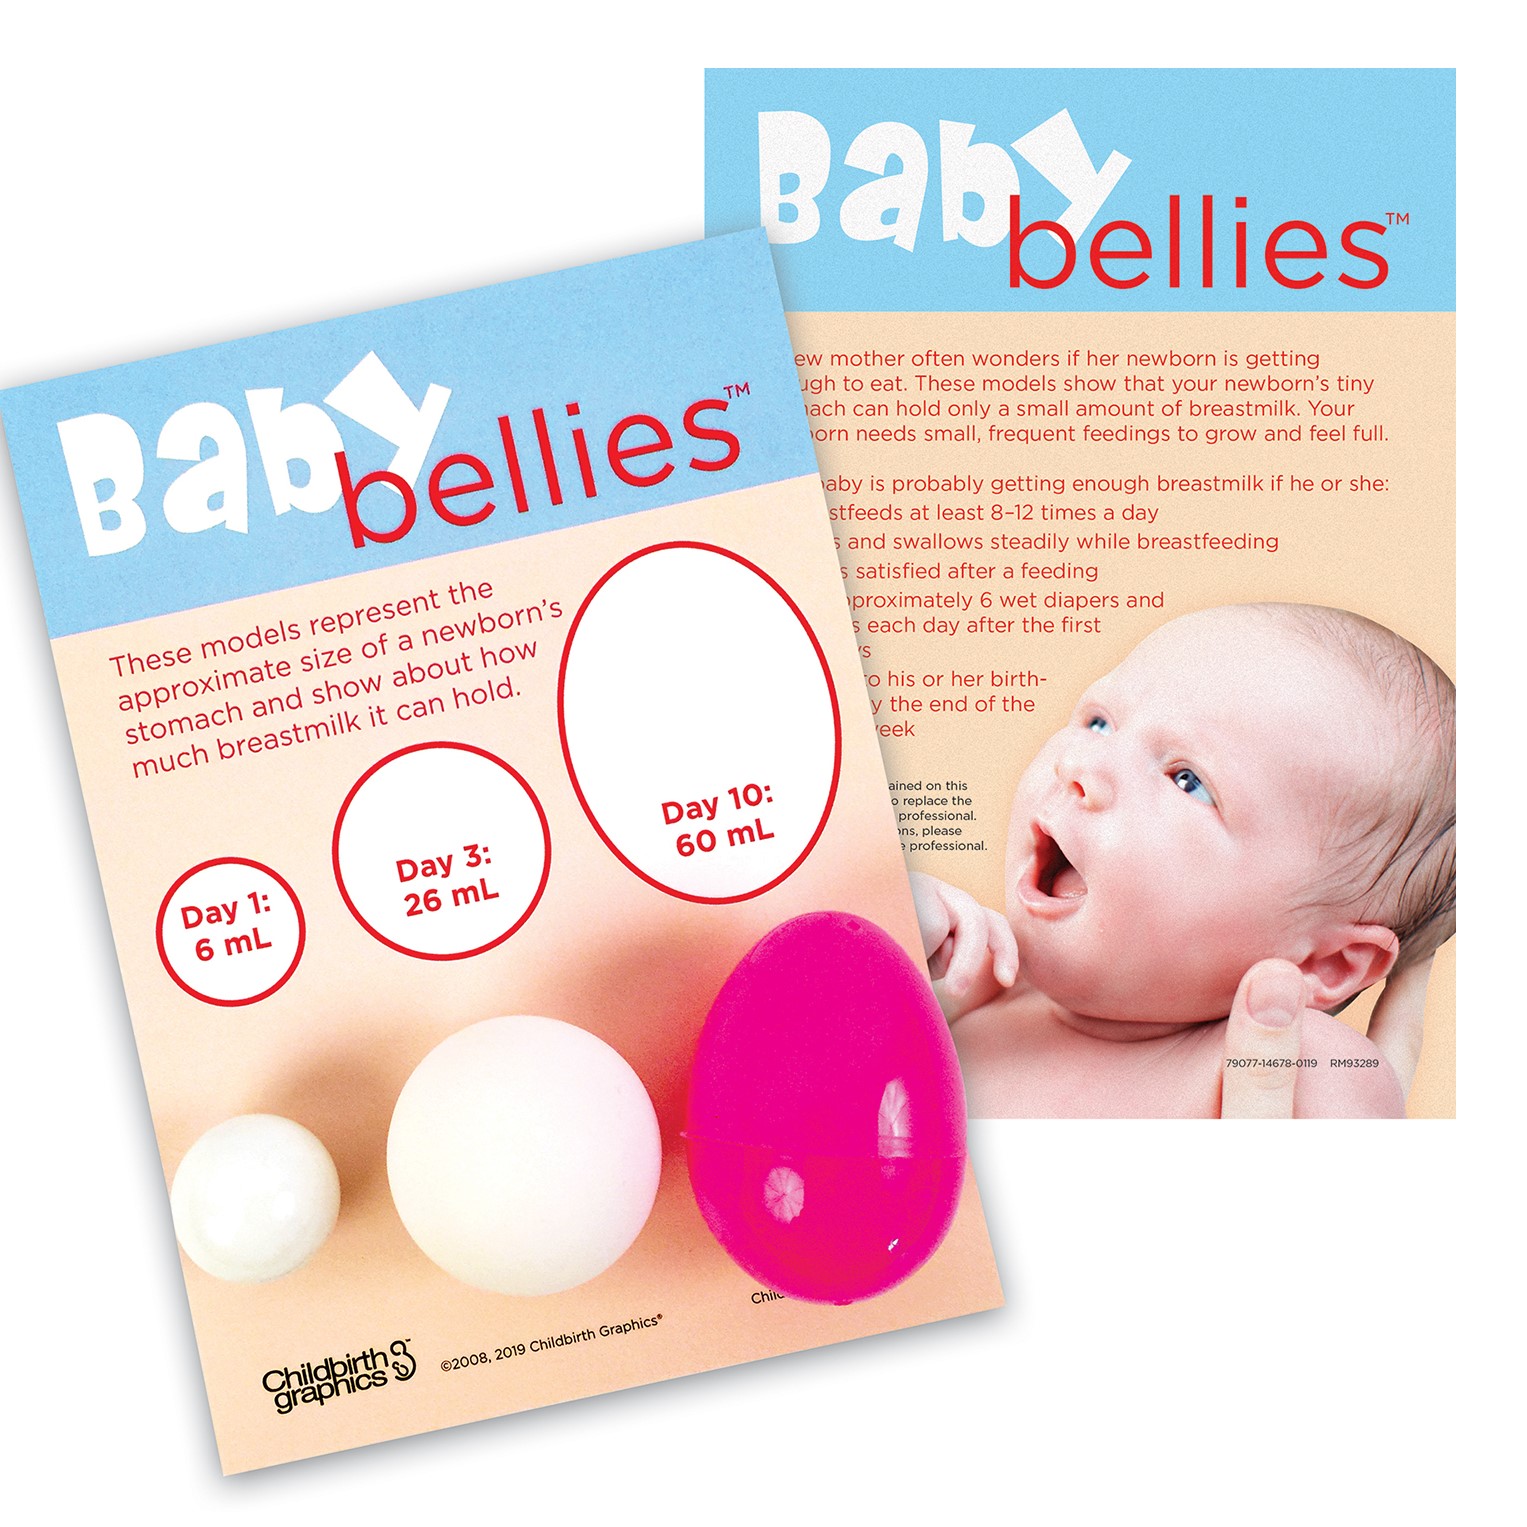 Baby Bellies™ for breastfeeding education from Childbirth Graphics